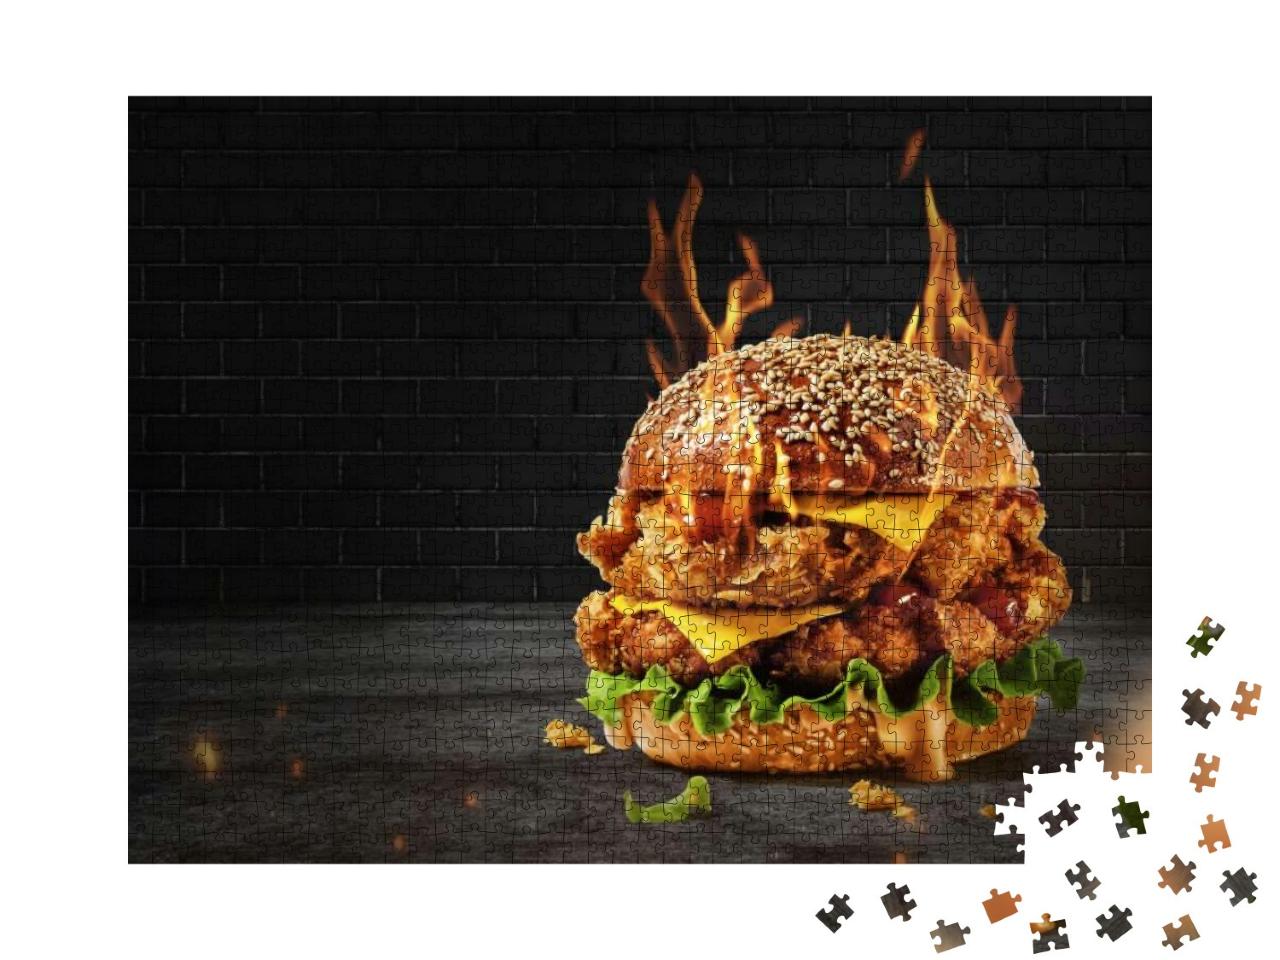 Delicious Spicy Fried Chicken Burger Ads with Burning Fir... Jigsaw Puzzle with 1000 pieces